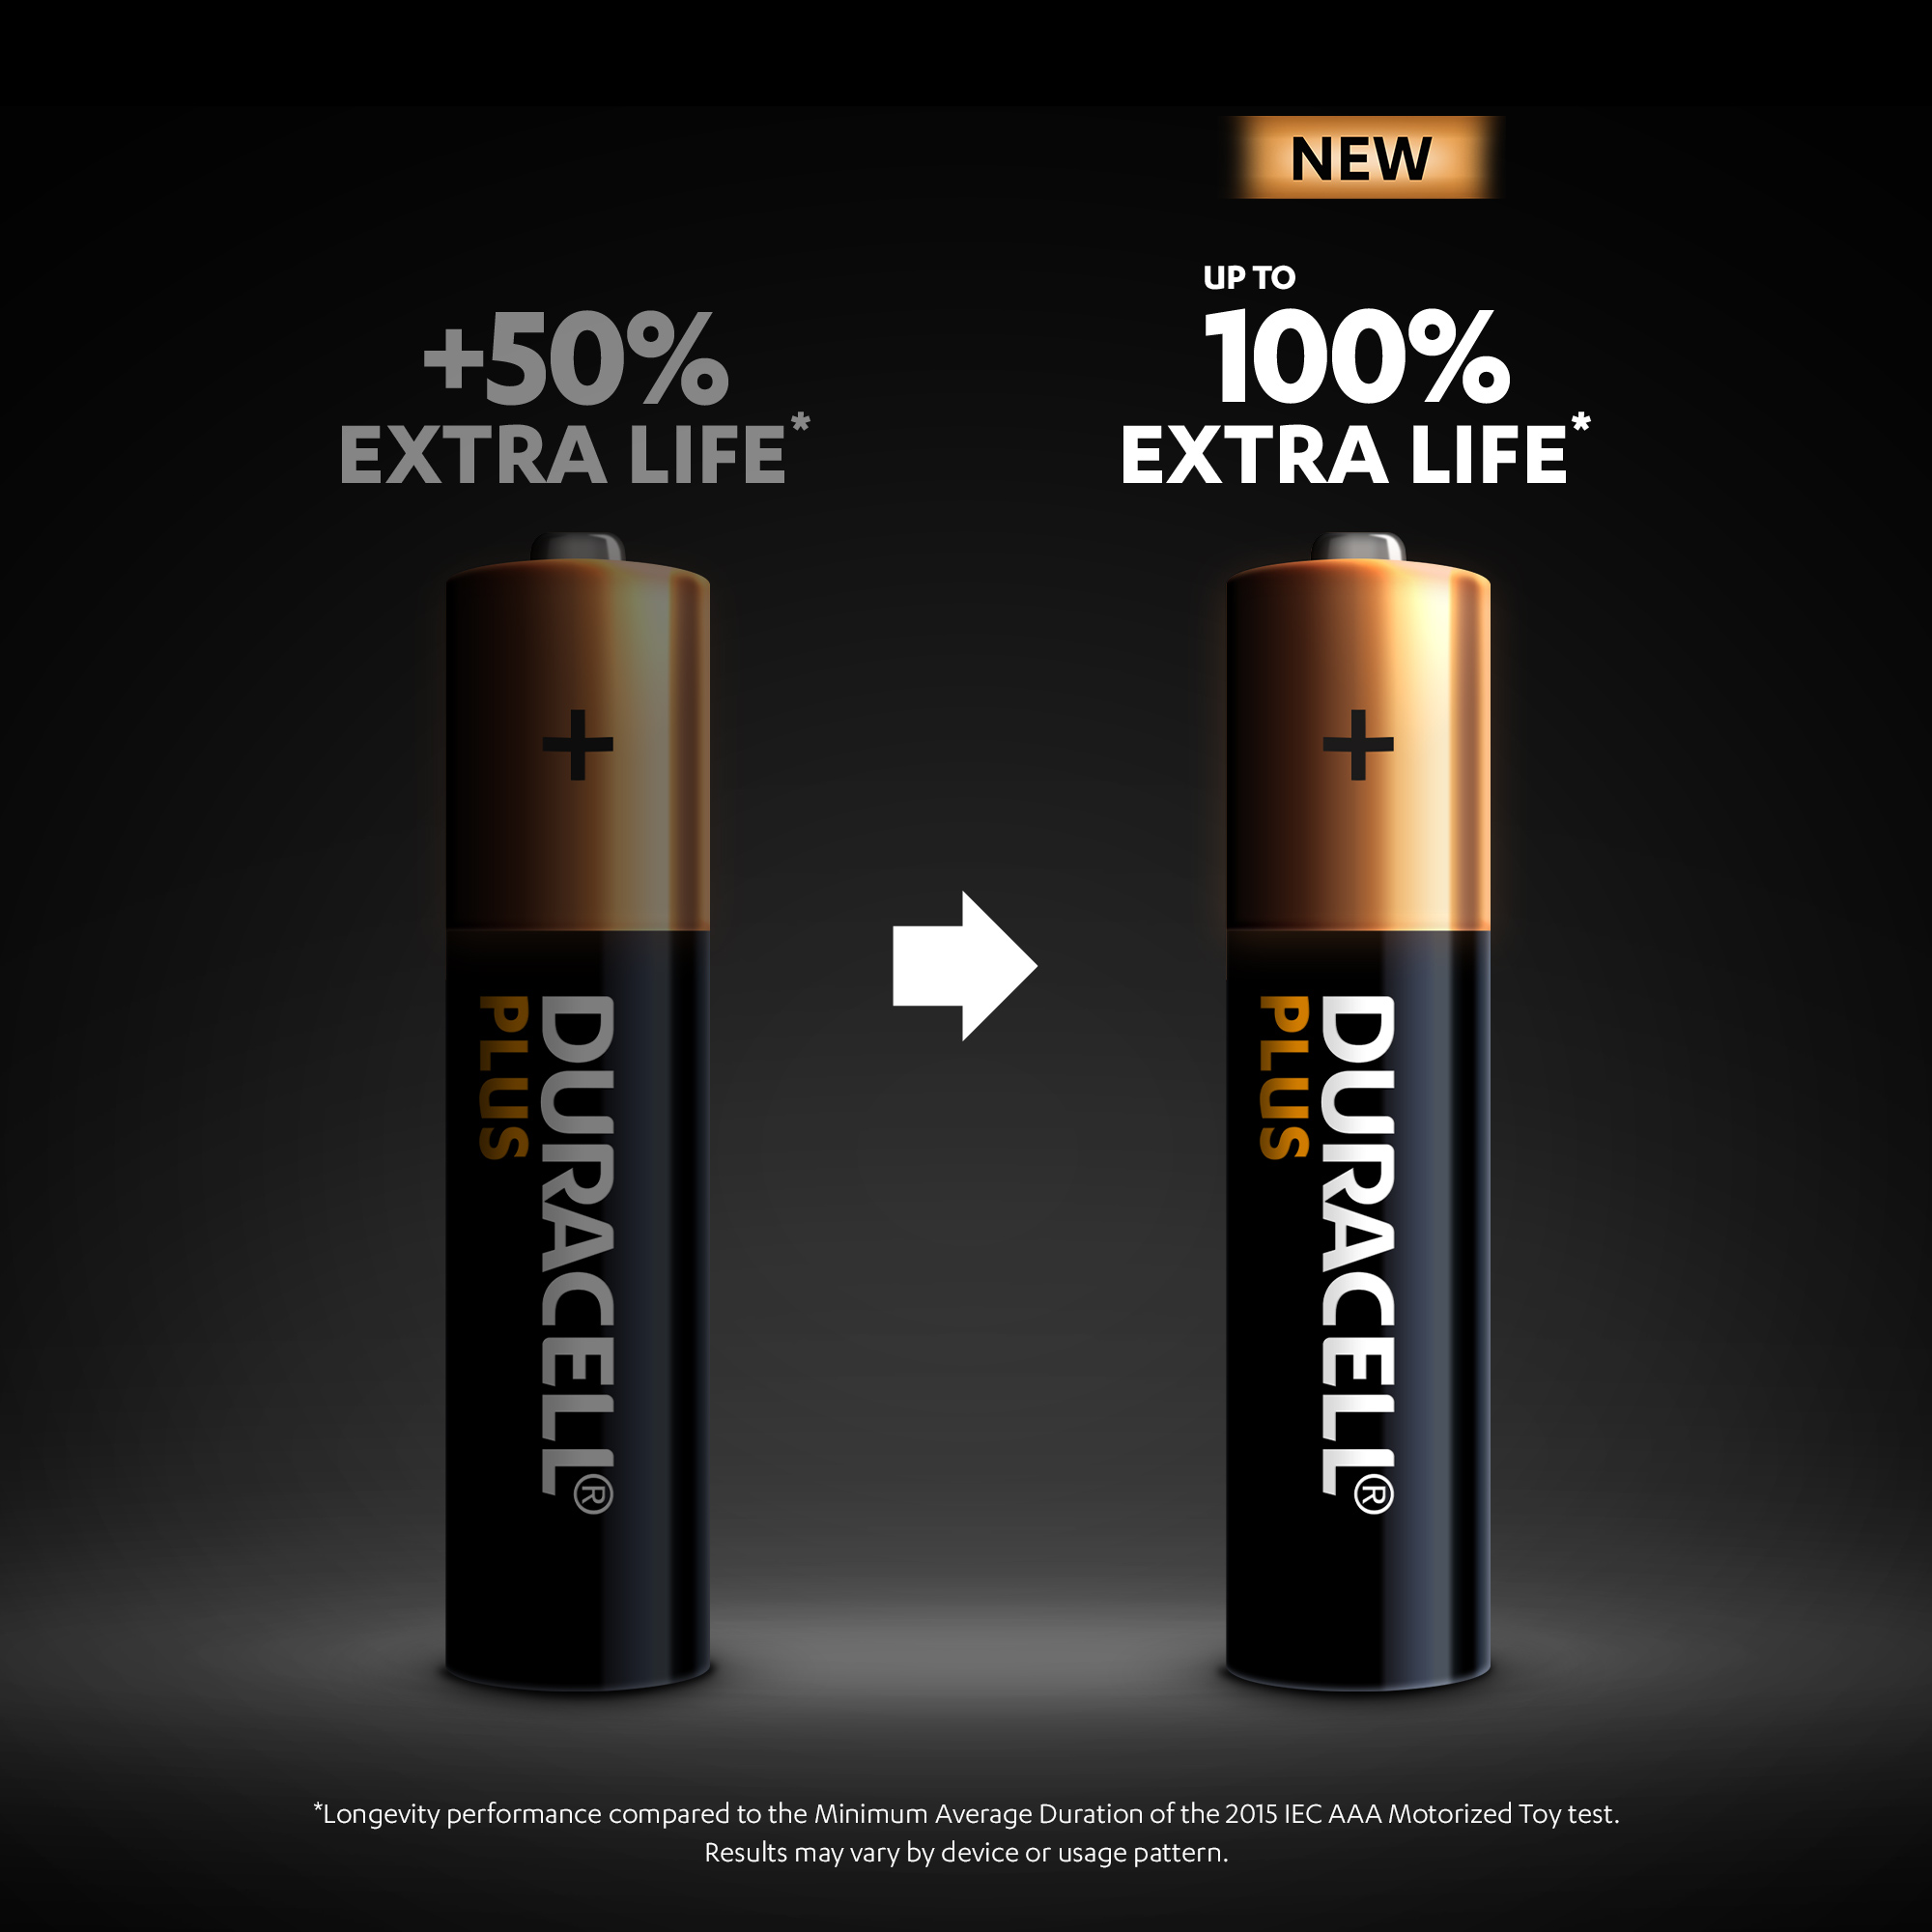 DURACELL PLUS 100% EXTRA LIFE ALKALINE POWER AAA PACK OF 4